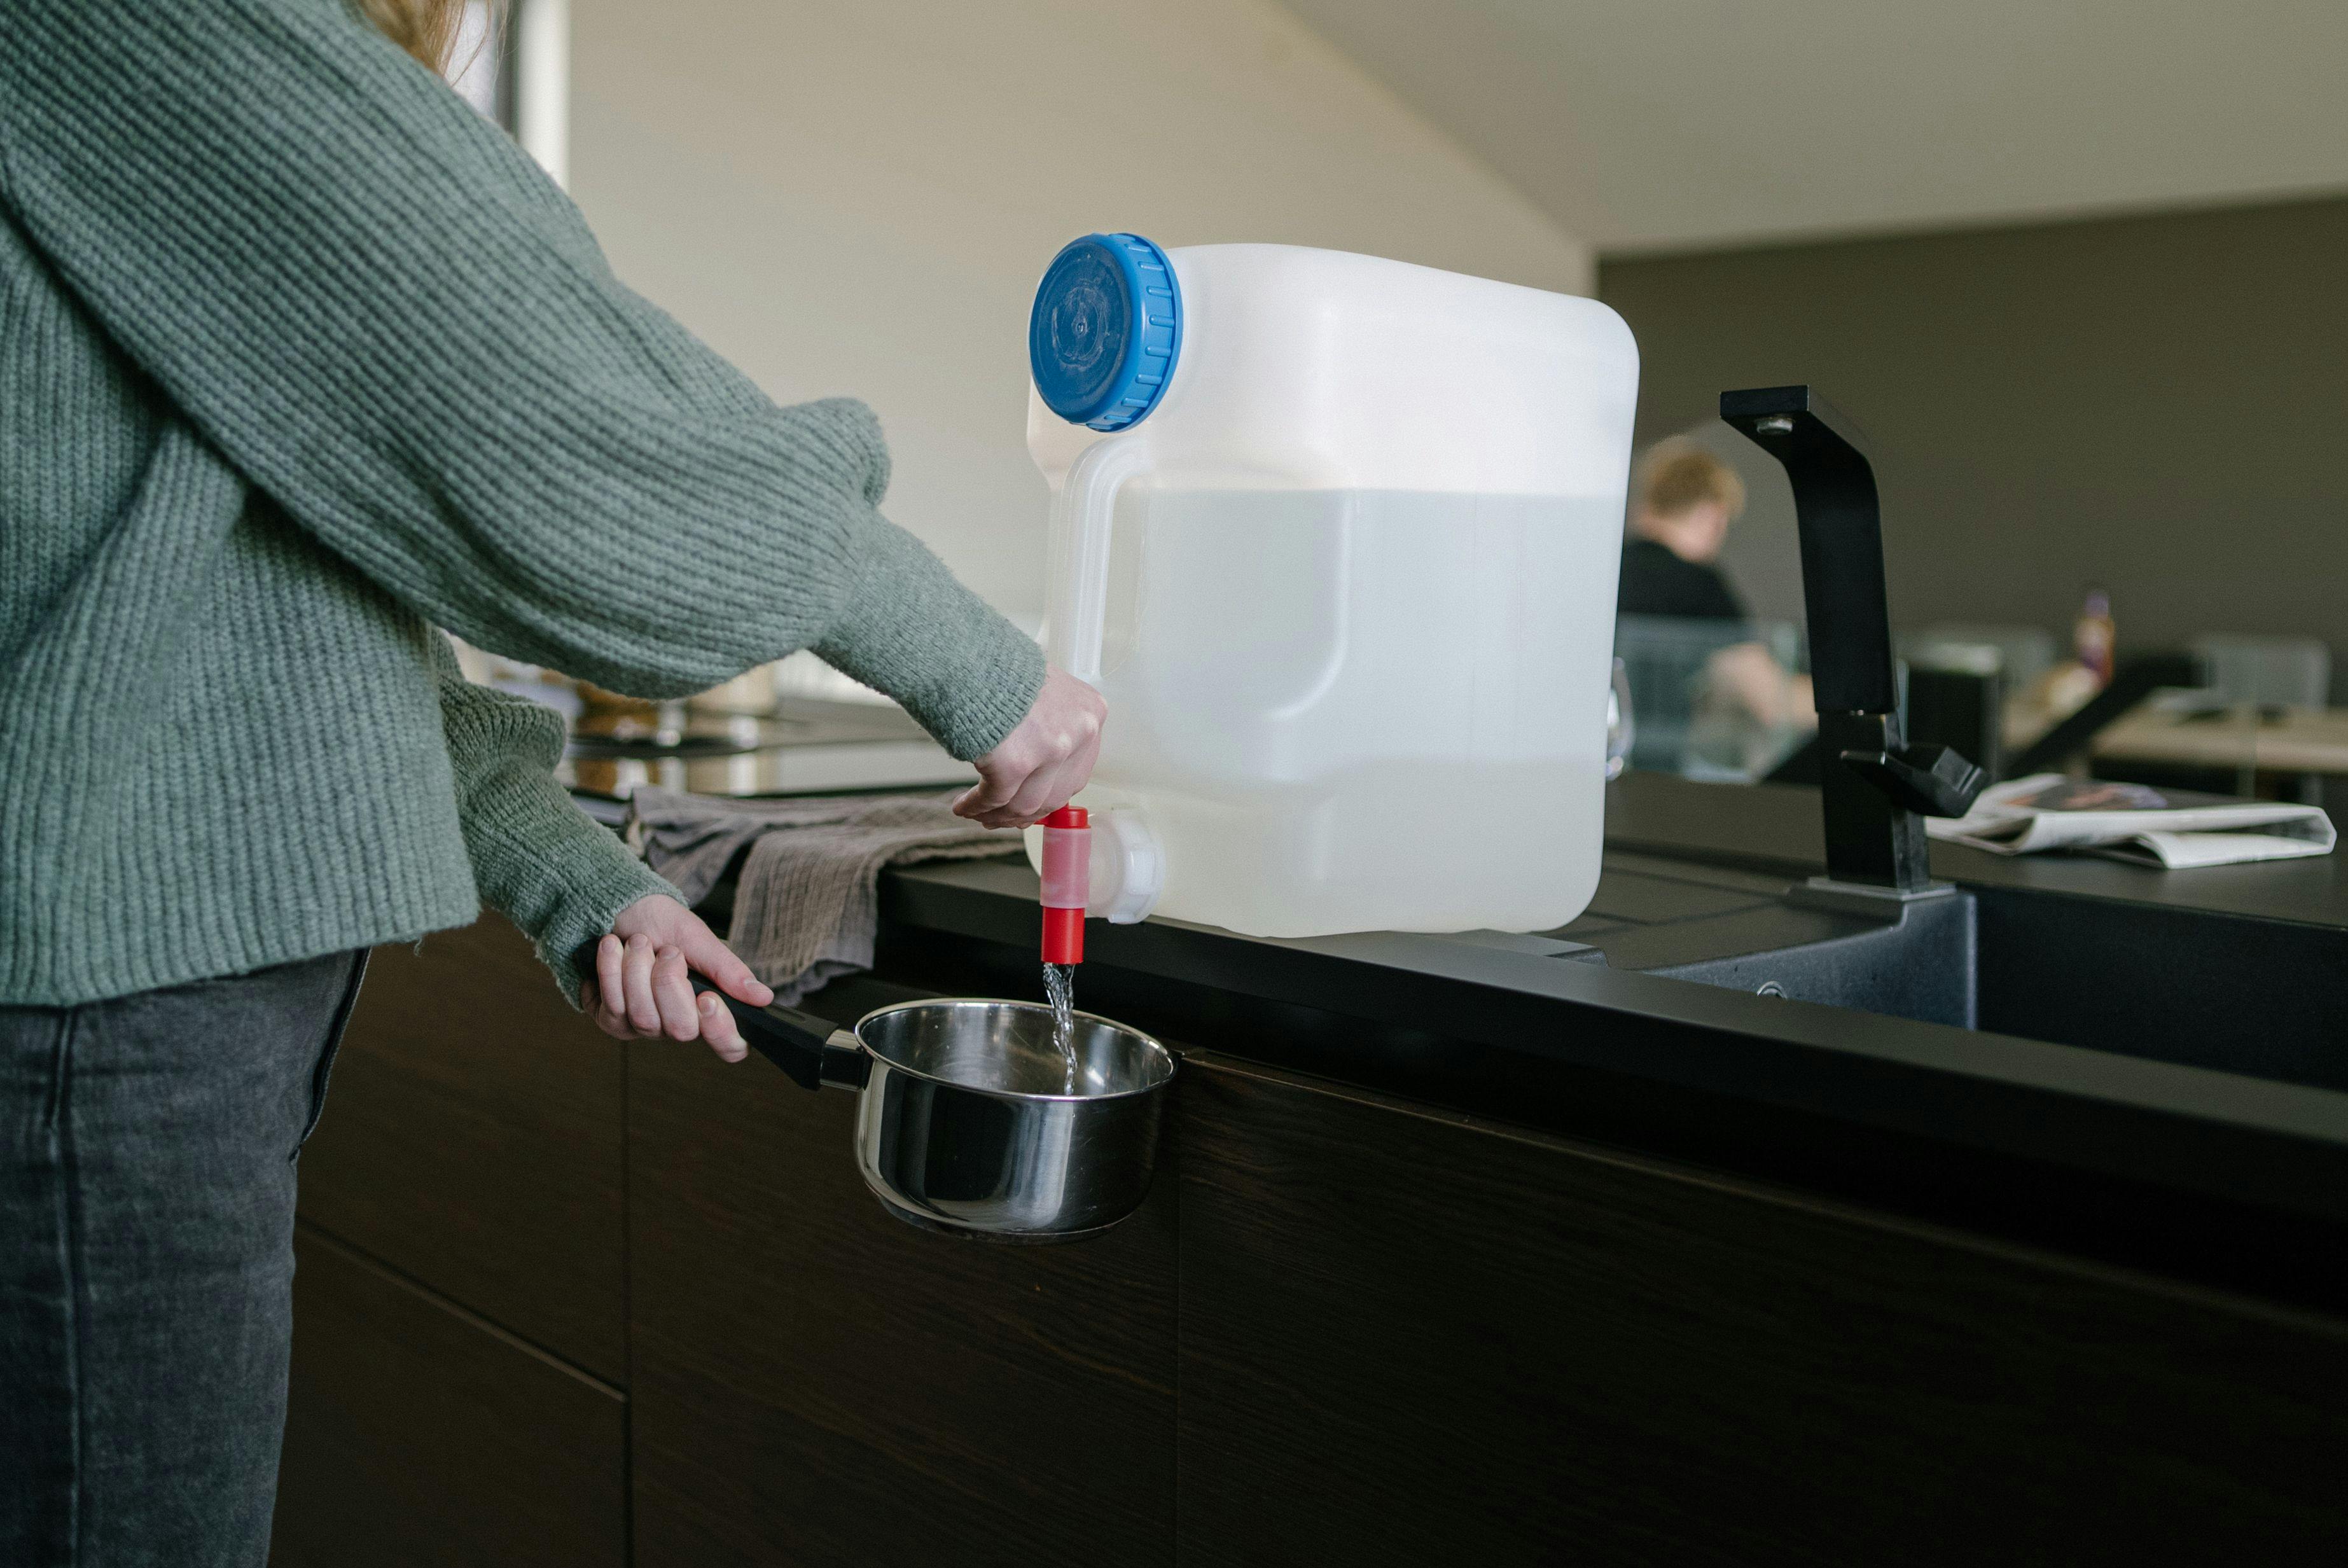 A large water jug stands on the kitchen counter next to a water tap where water has been running.